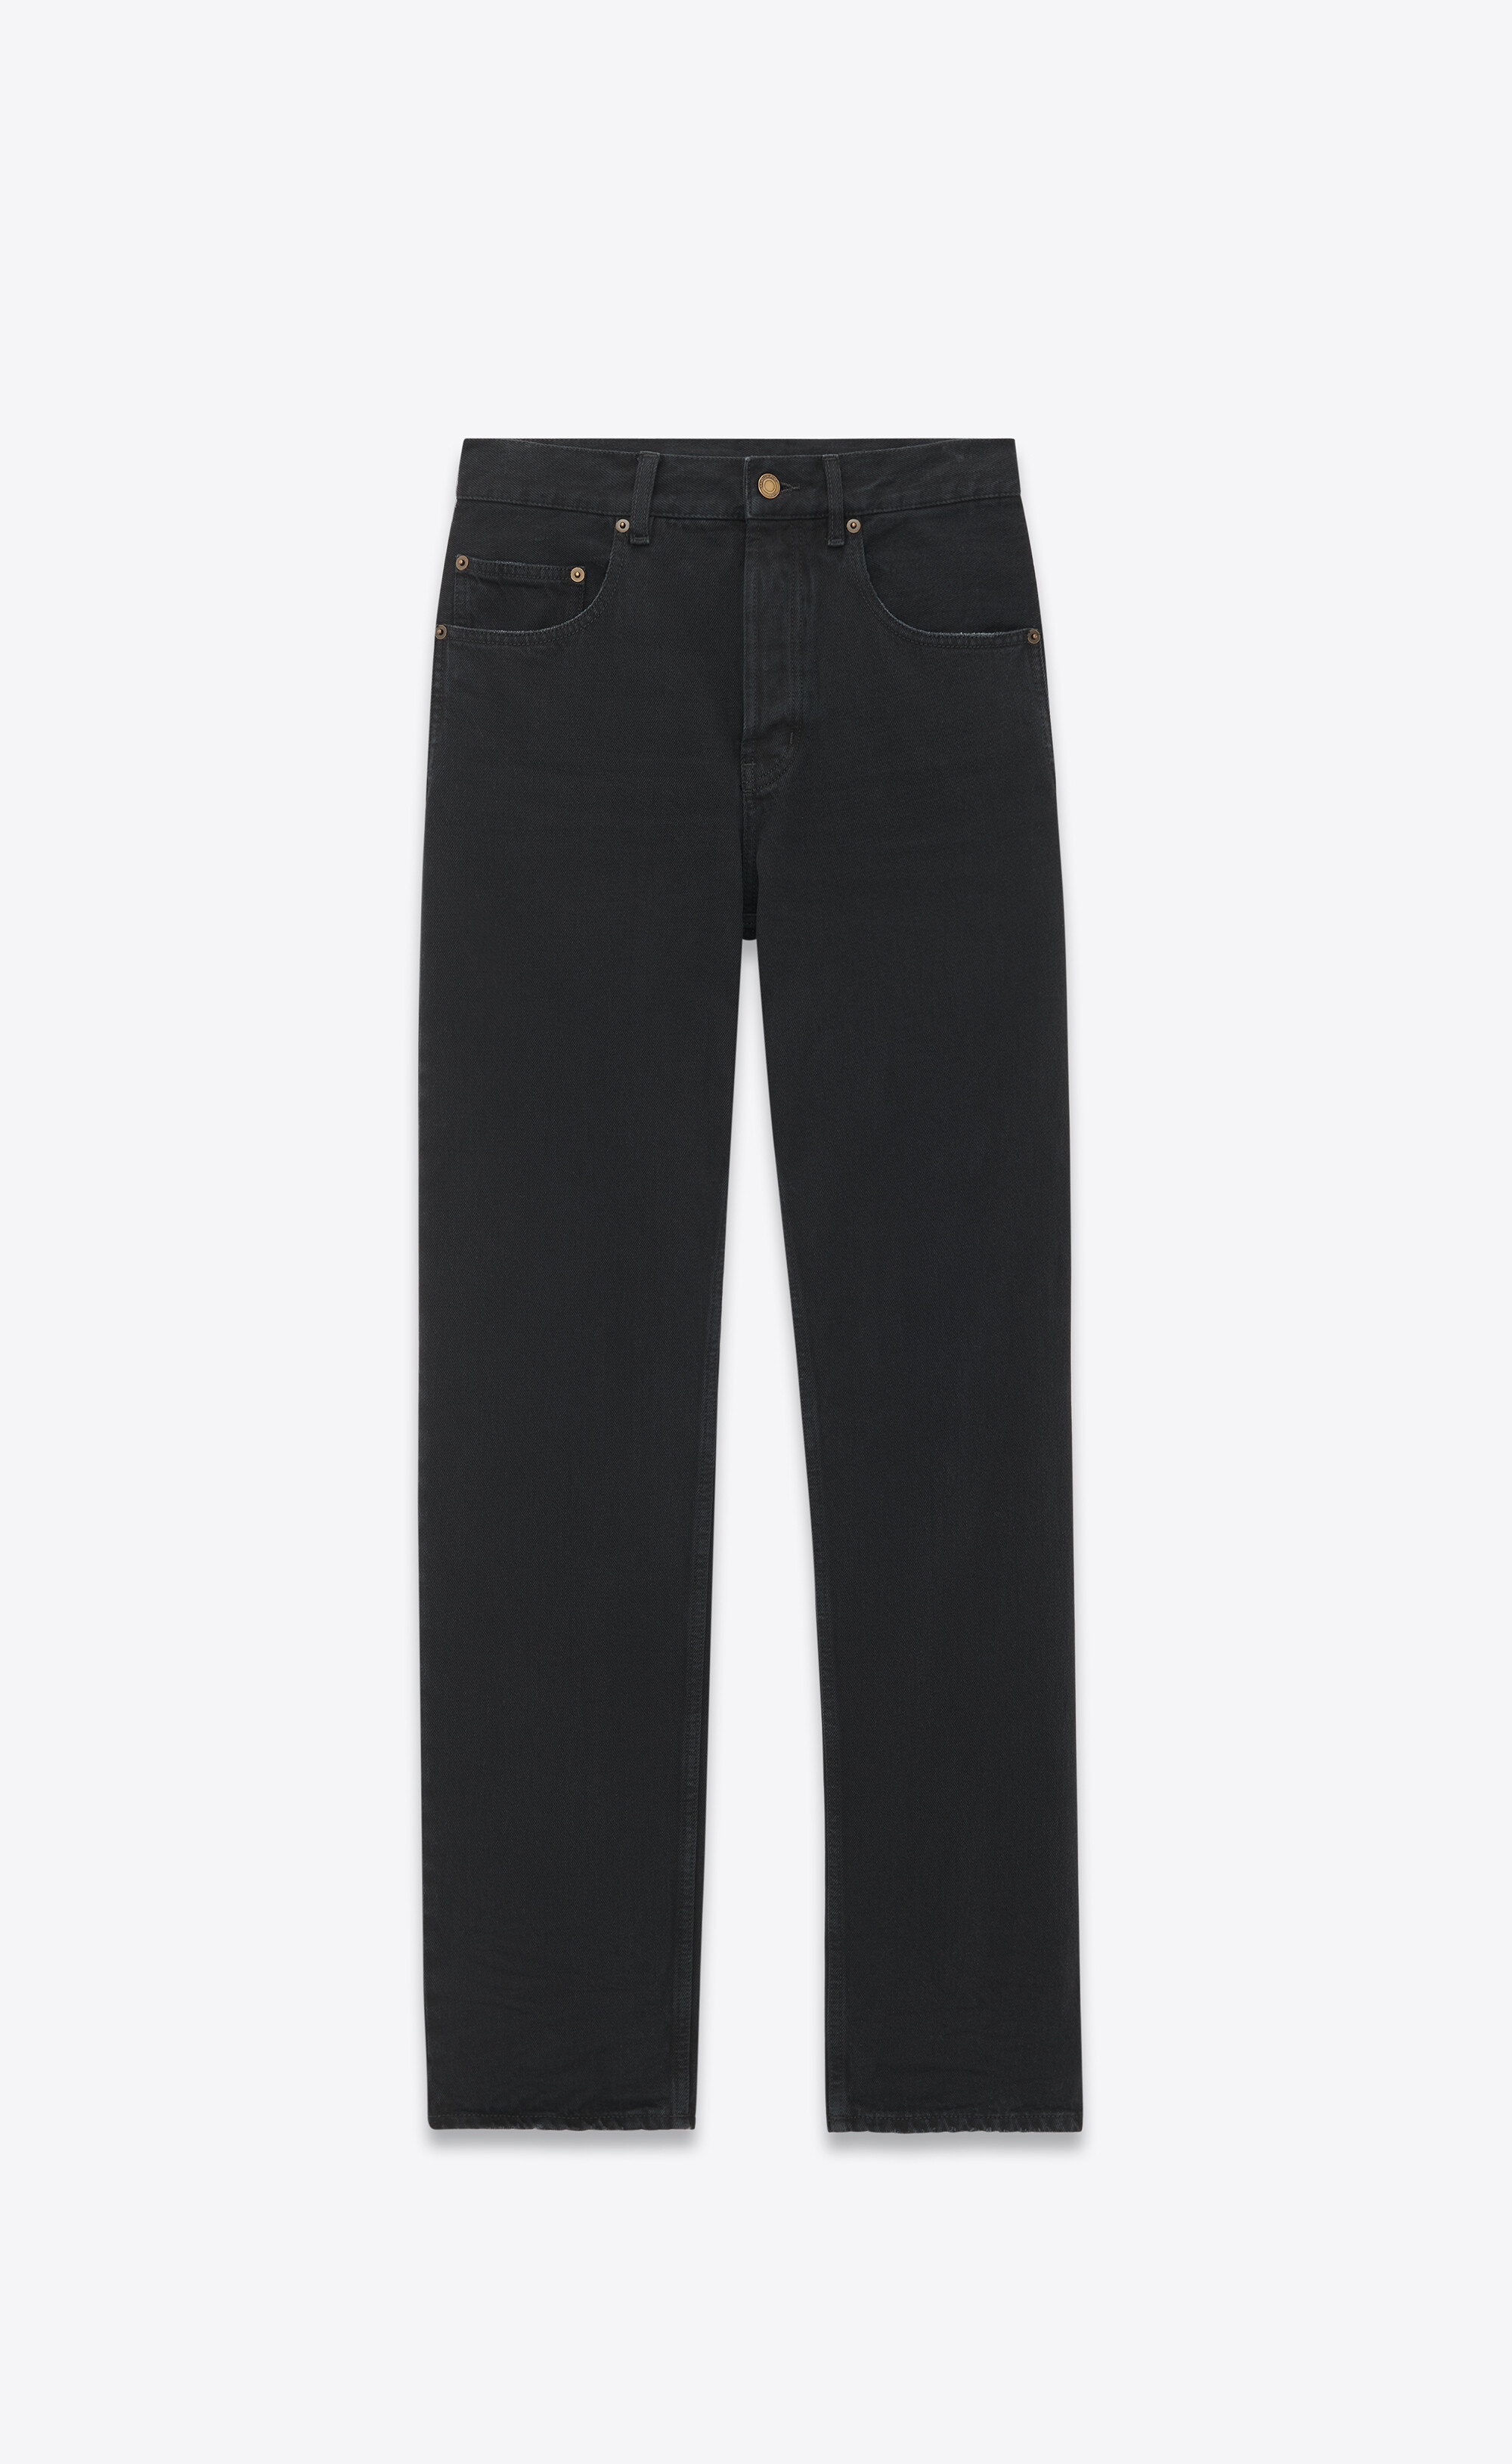 long extreme baggy jeans in carbon black denim - 1